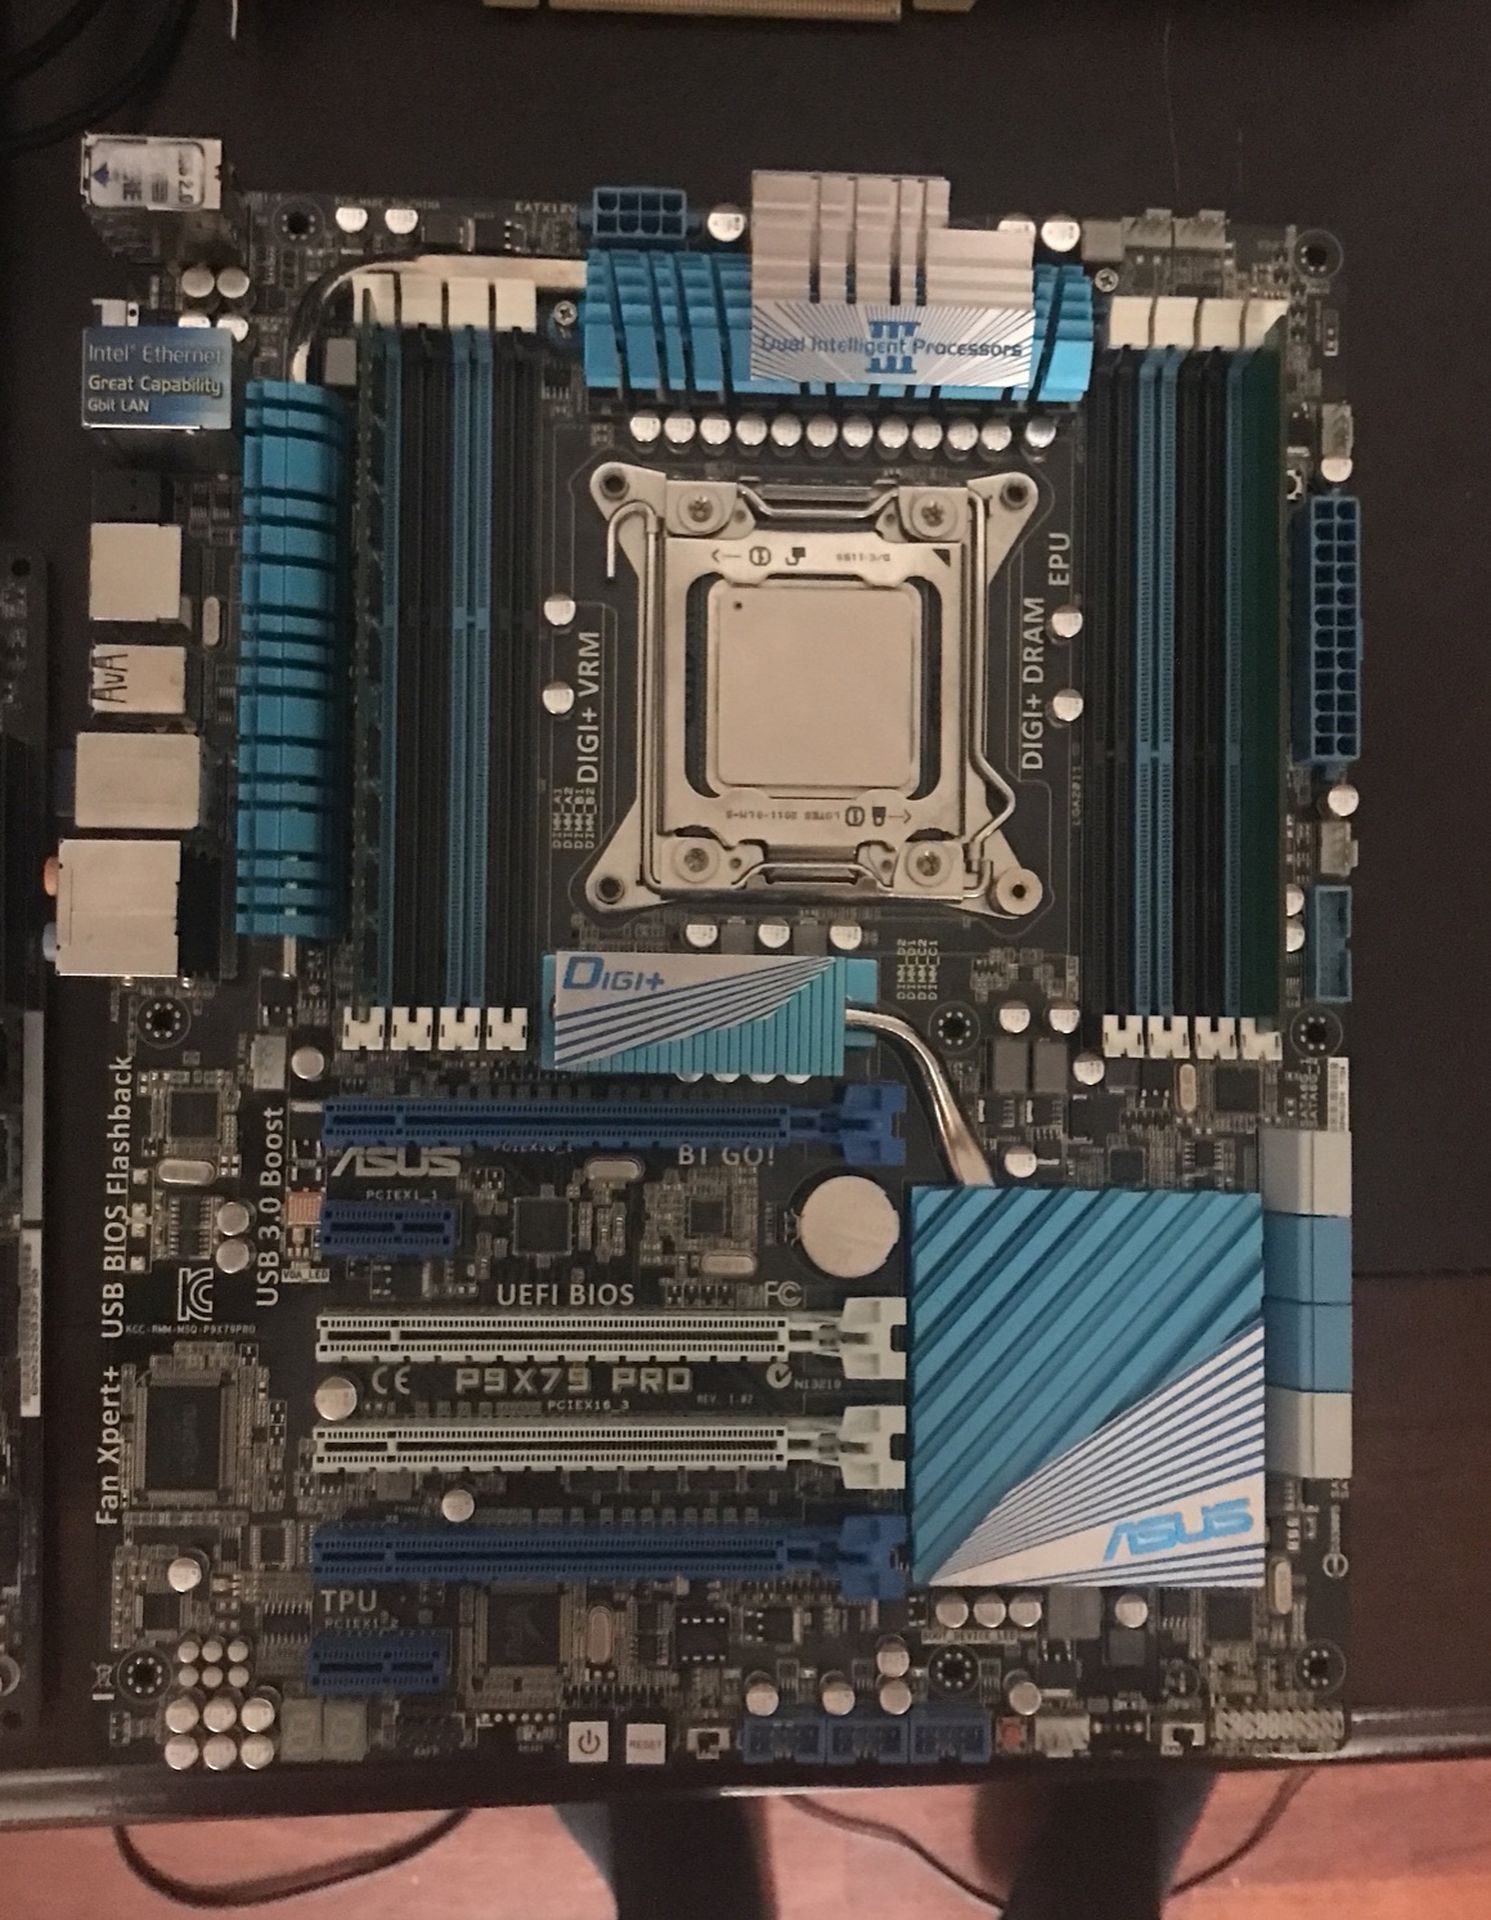 I7-3820 on P9X79 Pro Mb 6gb Ddr3, H81m-hds With I5-4460 8gb Ddr3, and H110m-a With I5-6600k and 8gb Ddr4 also have cpus and parts you can dig through